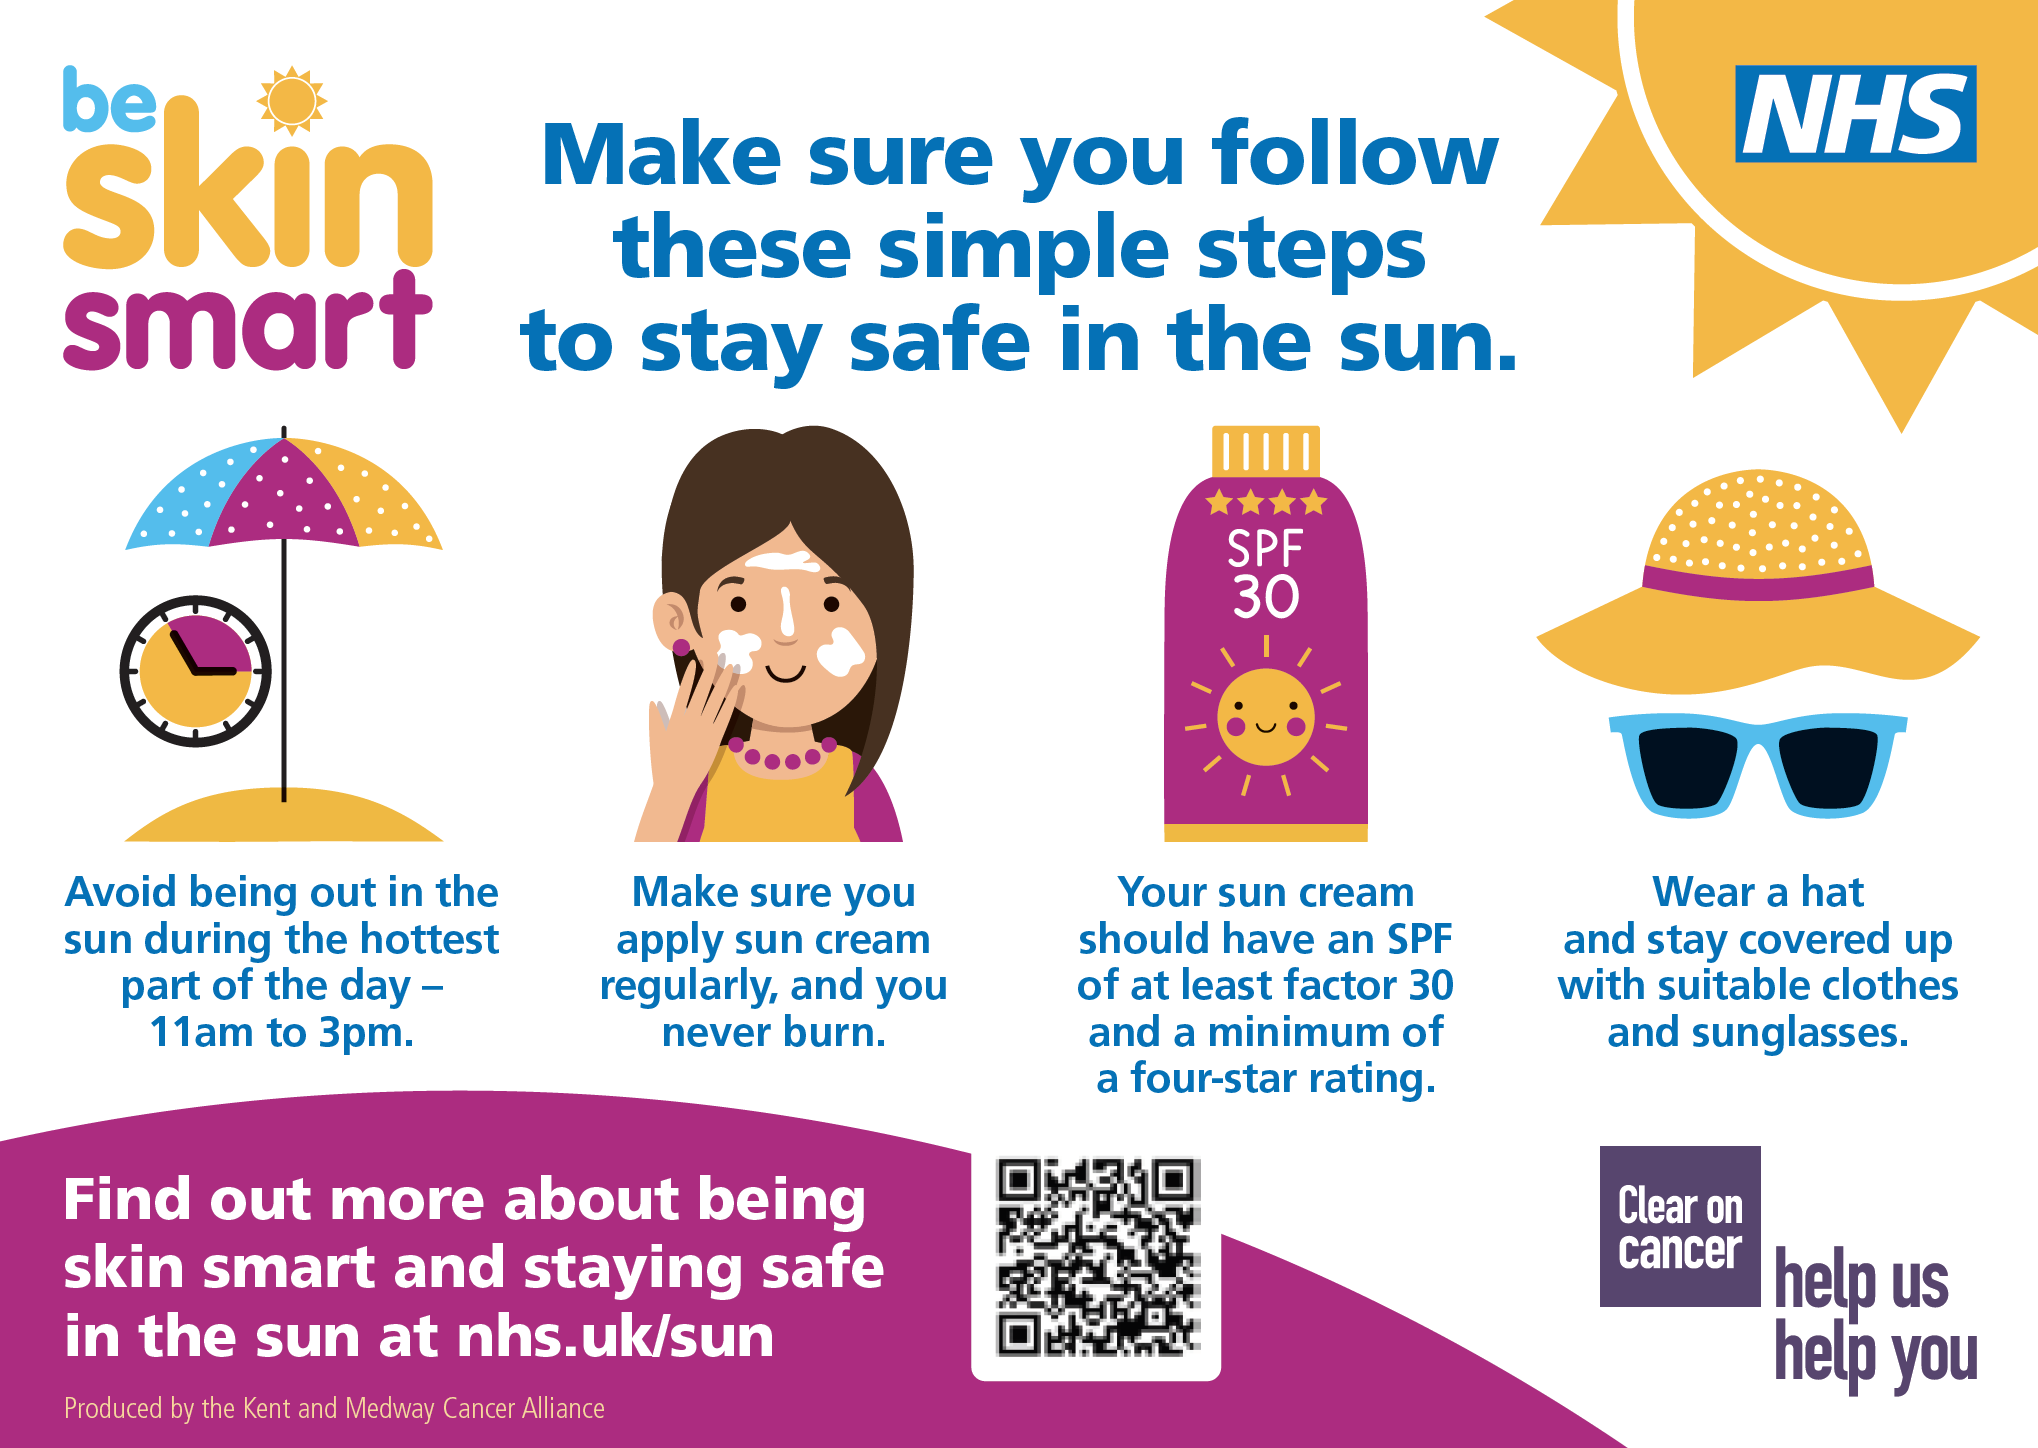 Make sure you follow these simple steps to stay safe in the sun. Avoid being out in the sun during the hottest part of the day – 11am to 3pm. Make sure you apply sun cream regularly, and you never burn. Your sun cream should have an SPF of at least factor 30 and a minimum of a four-star rating. Wear a hat and stay covered up with suitable clothes and sunglasses. Find out more about being skin smart and staying safe in the sun at nhs.uk/sun Produced by the Kent and Medway Cancer Alliance.